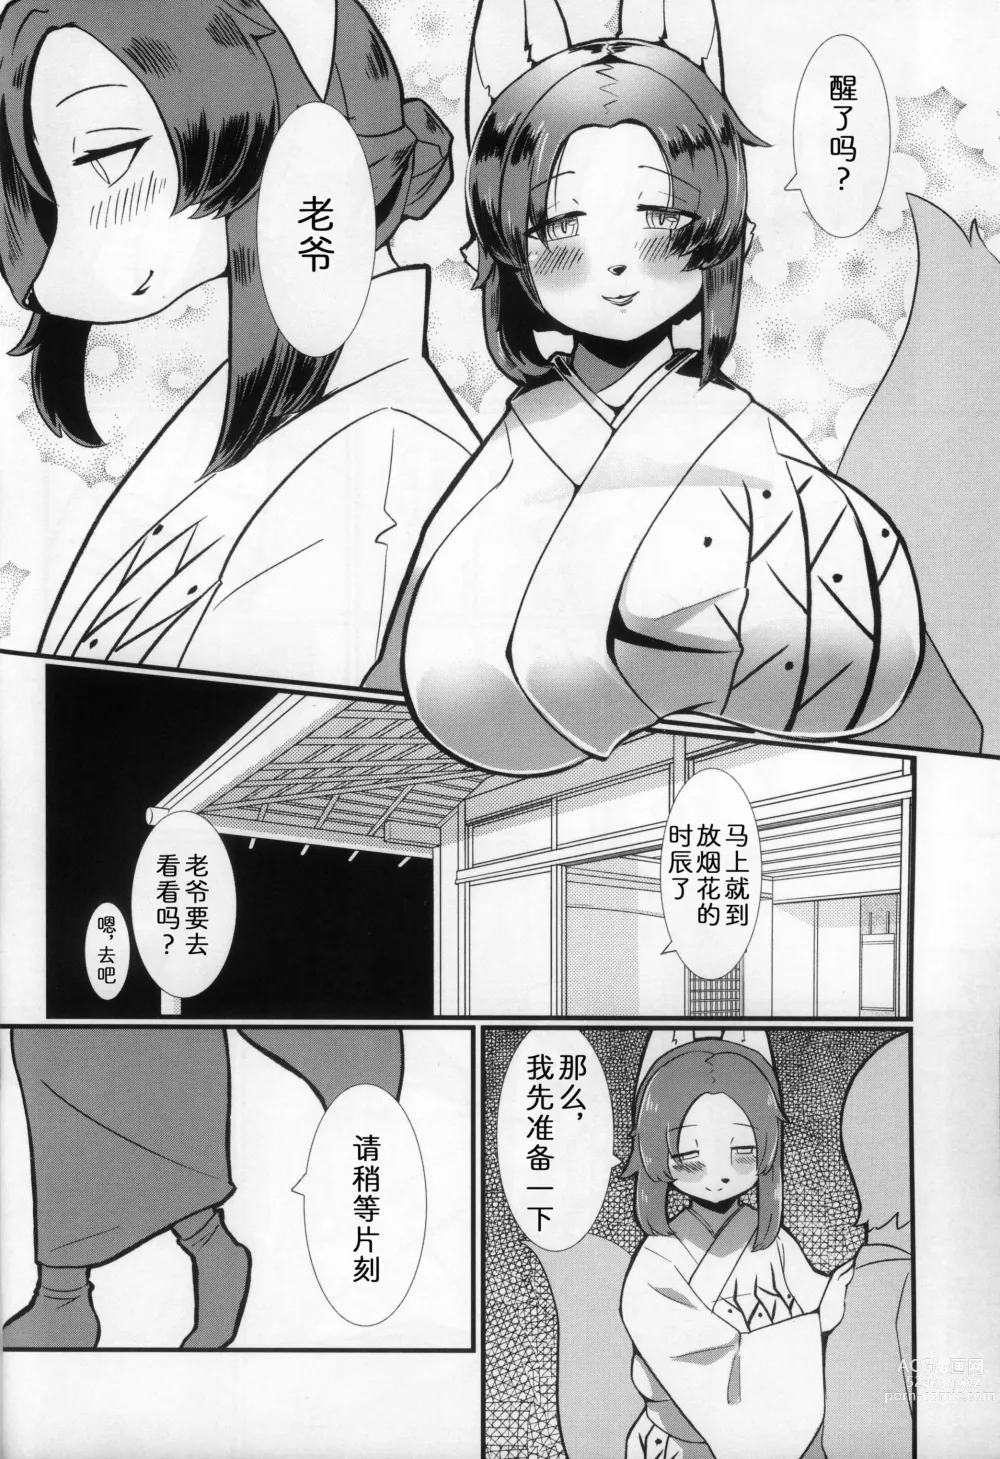 Page 6 of doujinshi 七彩之蝶